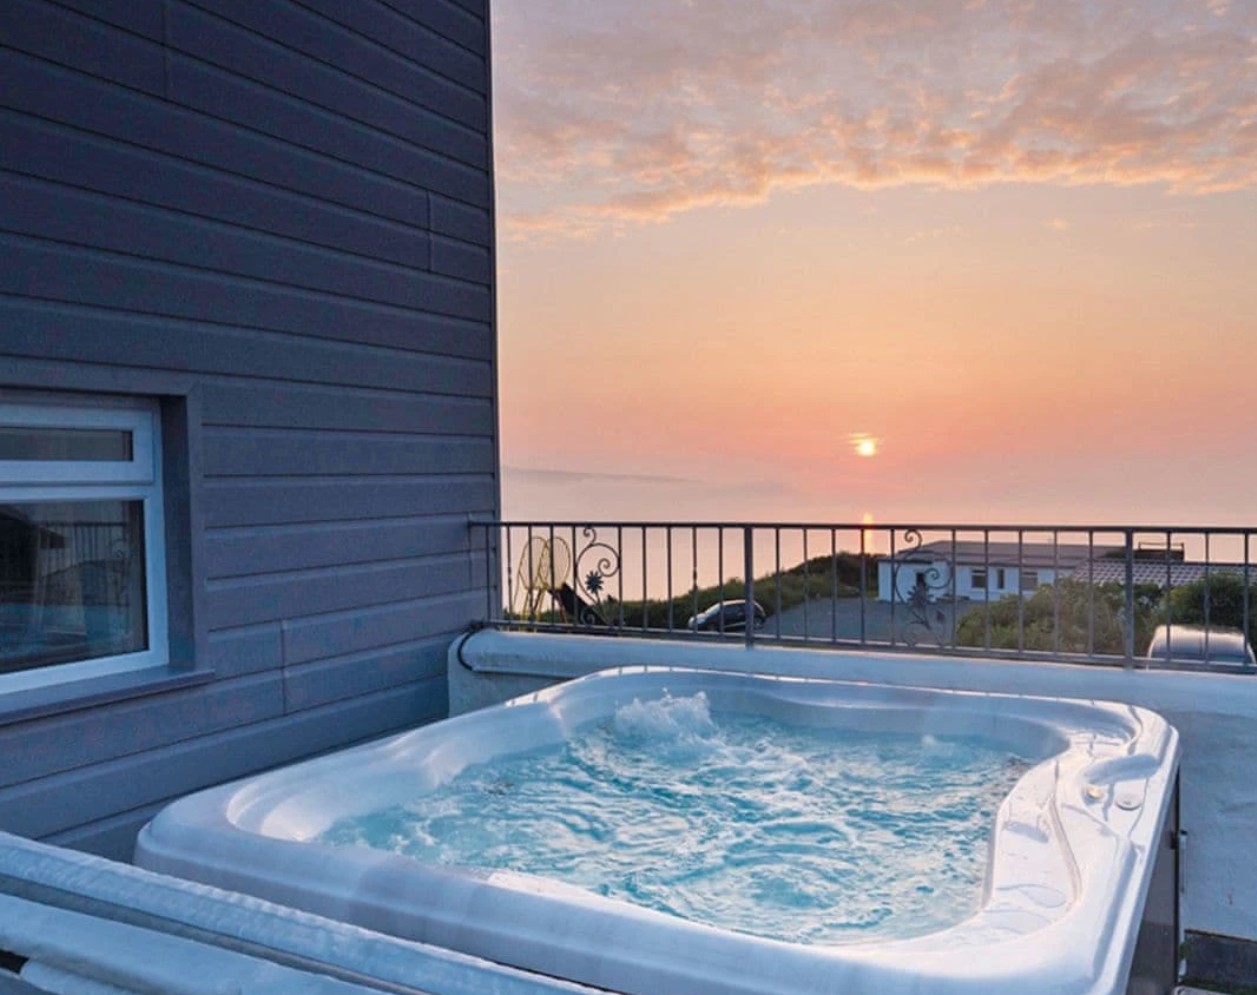 Celtic Escapes lodges - a great view from your hot tub